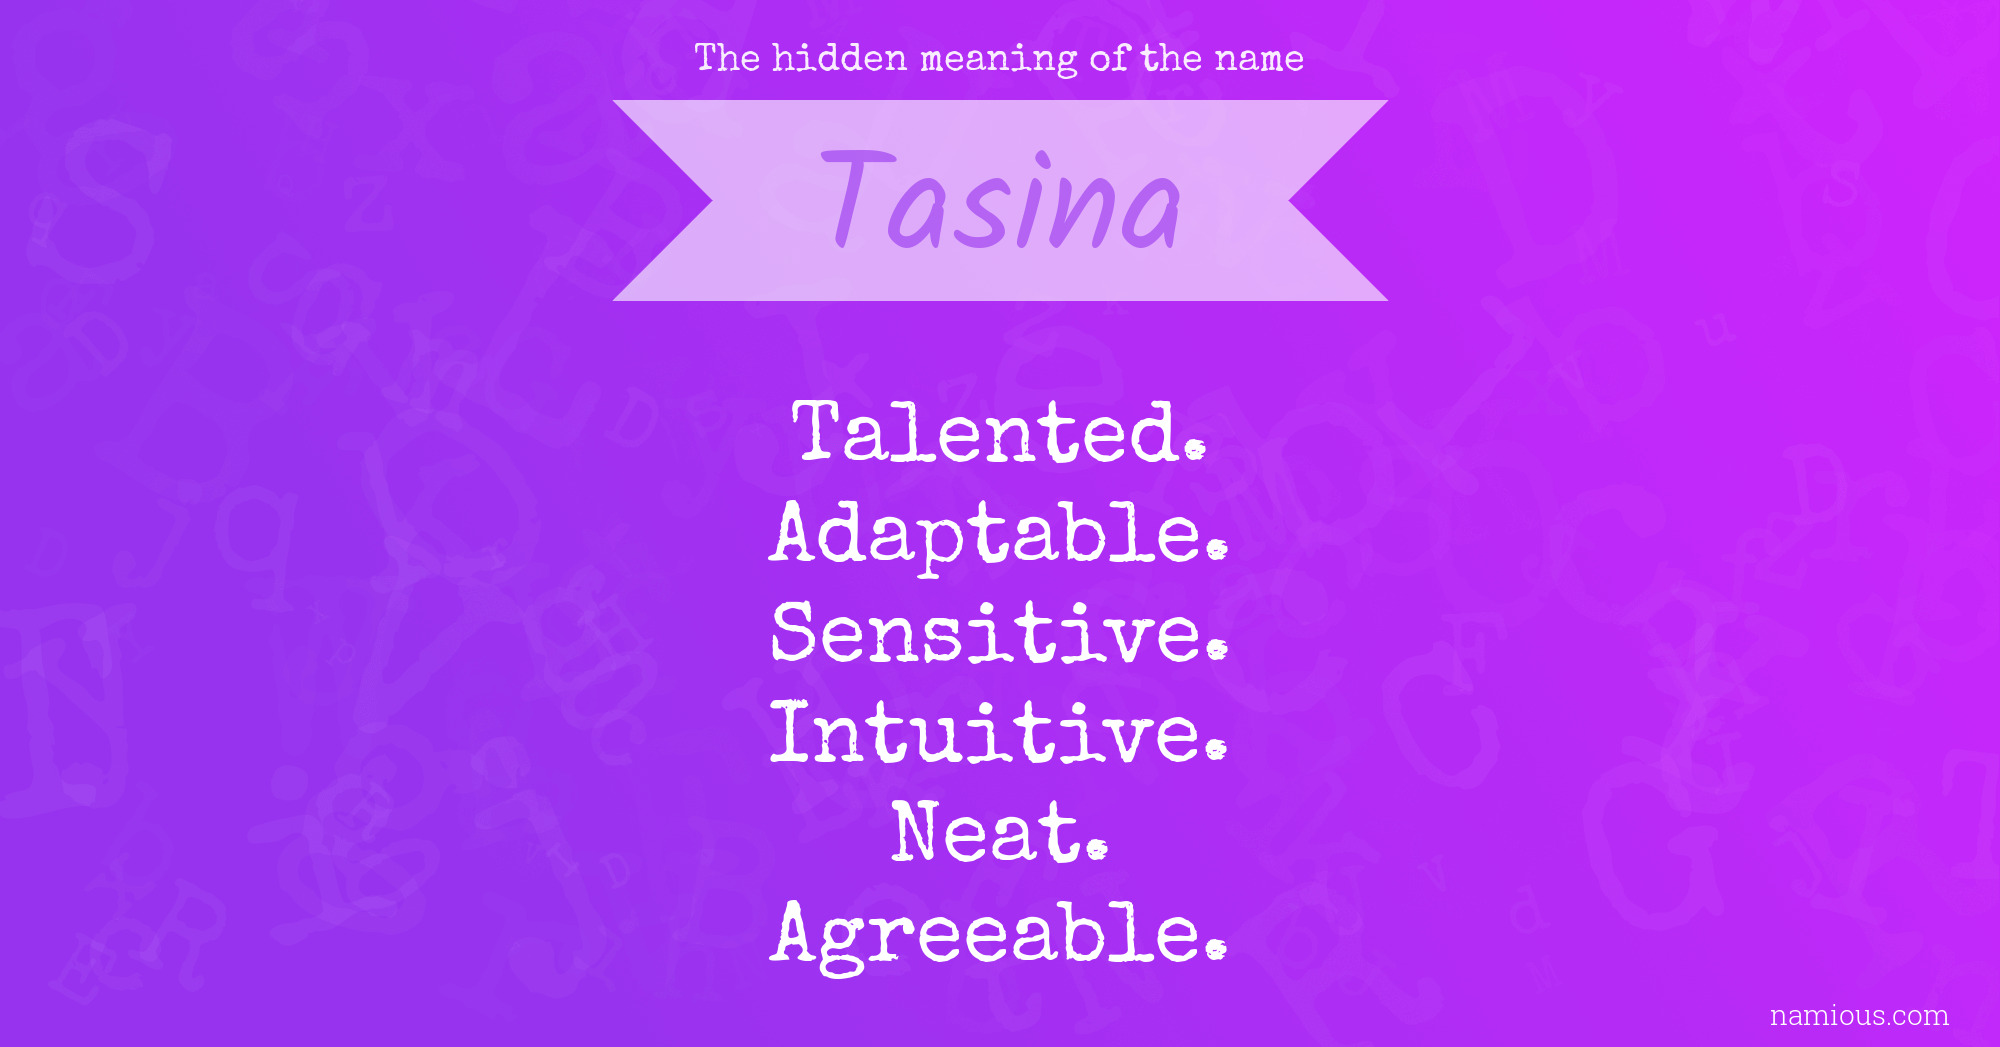 The hidden meaning of the name Tasina